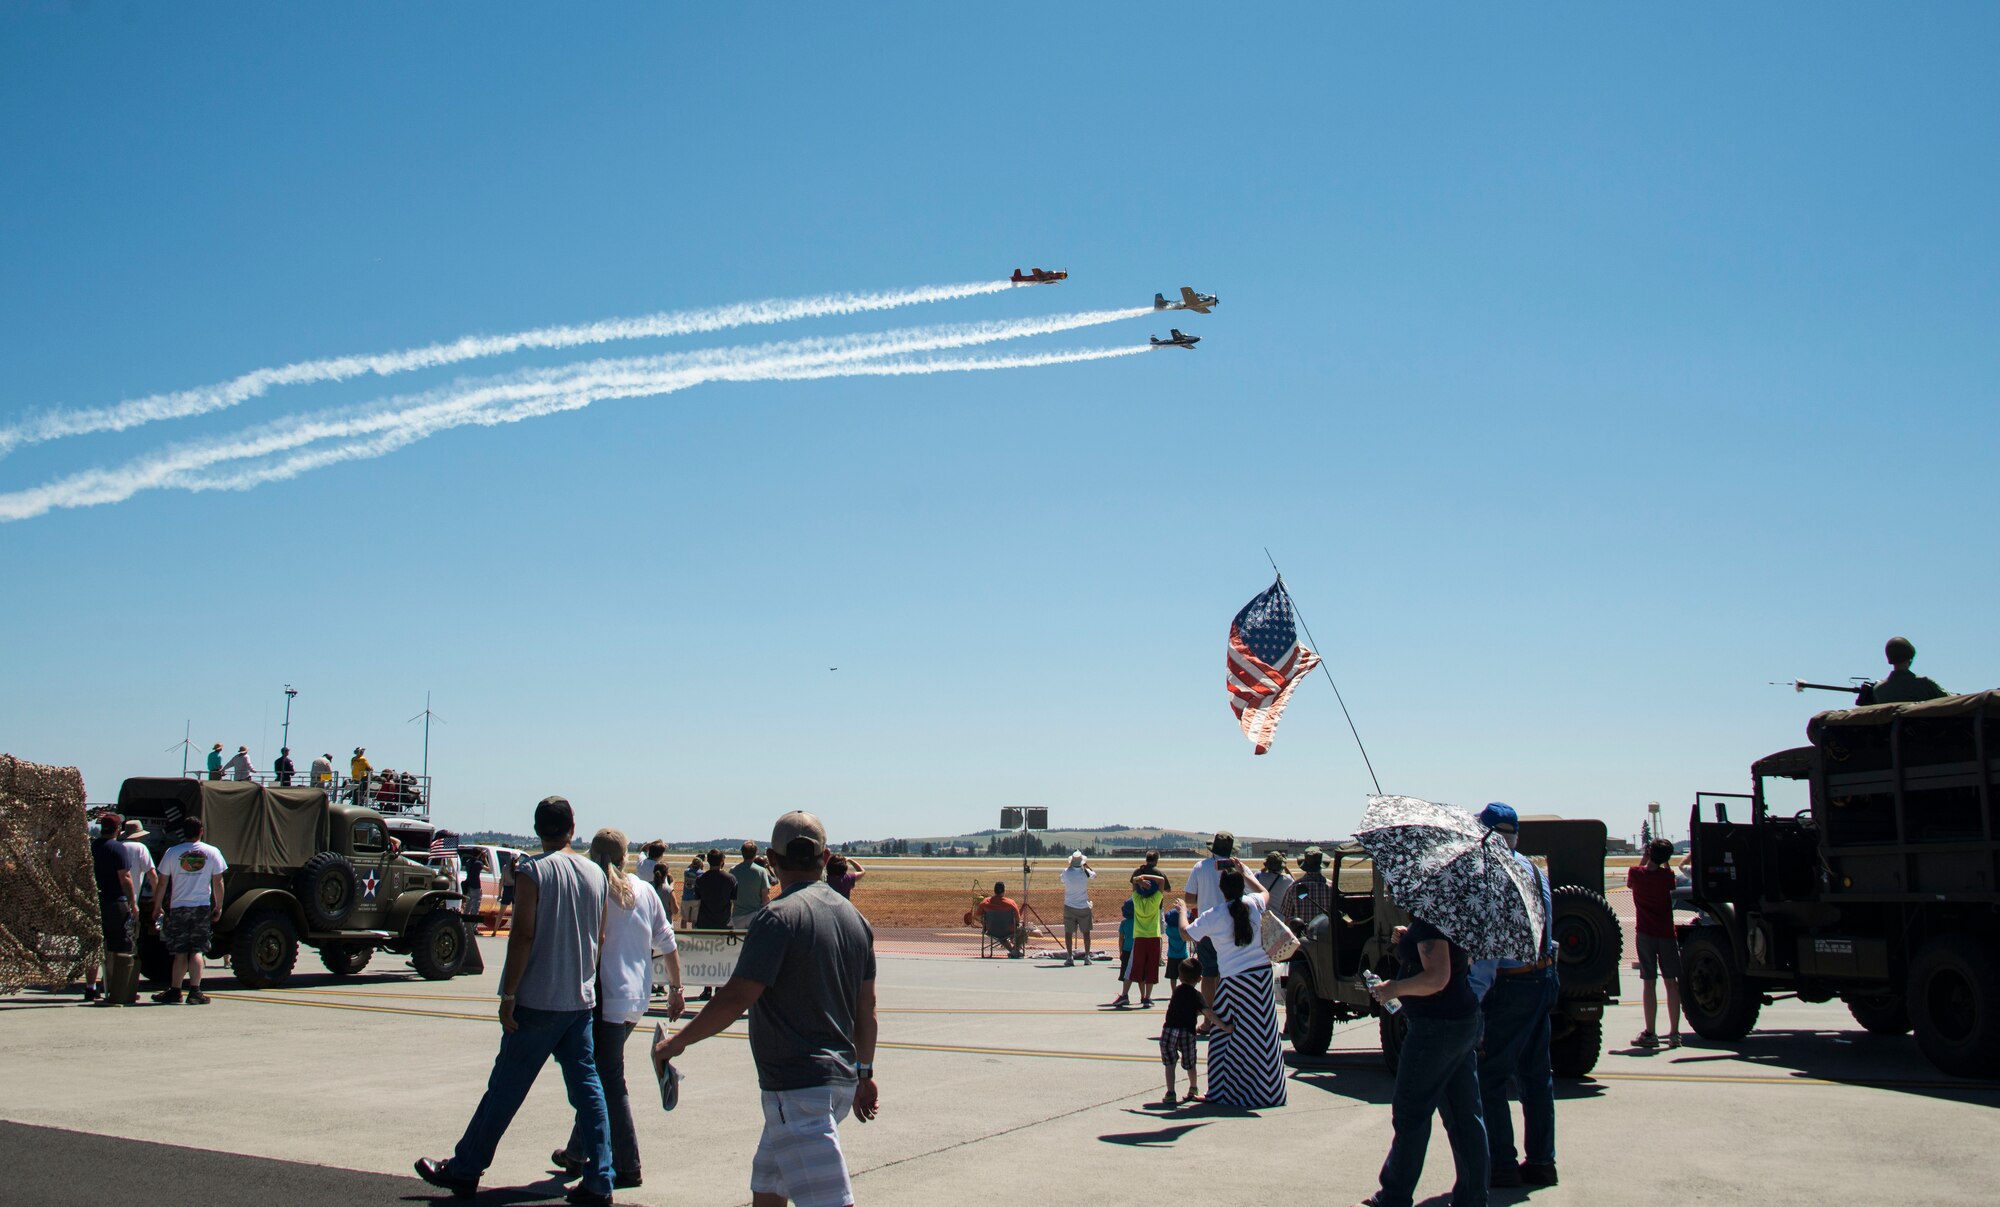 Service members and members of the local community watch as the Cascade Warbirds perform during the Skyfest 2017 Air Show and Open House at Fairhcild Air Force Base, Washington, July 29, 2017. SkyFest was an opportunity to give the local and regional community a chance to view Airmen and our resources. (U.S. Air Force photo/Senior Airman Janelle Patiño)